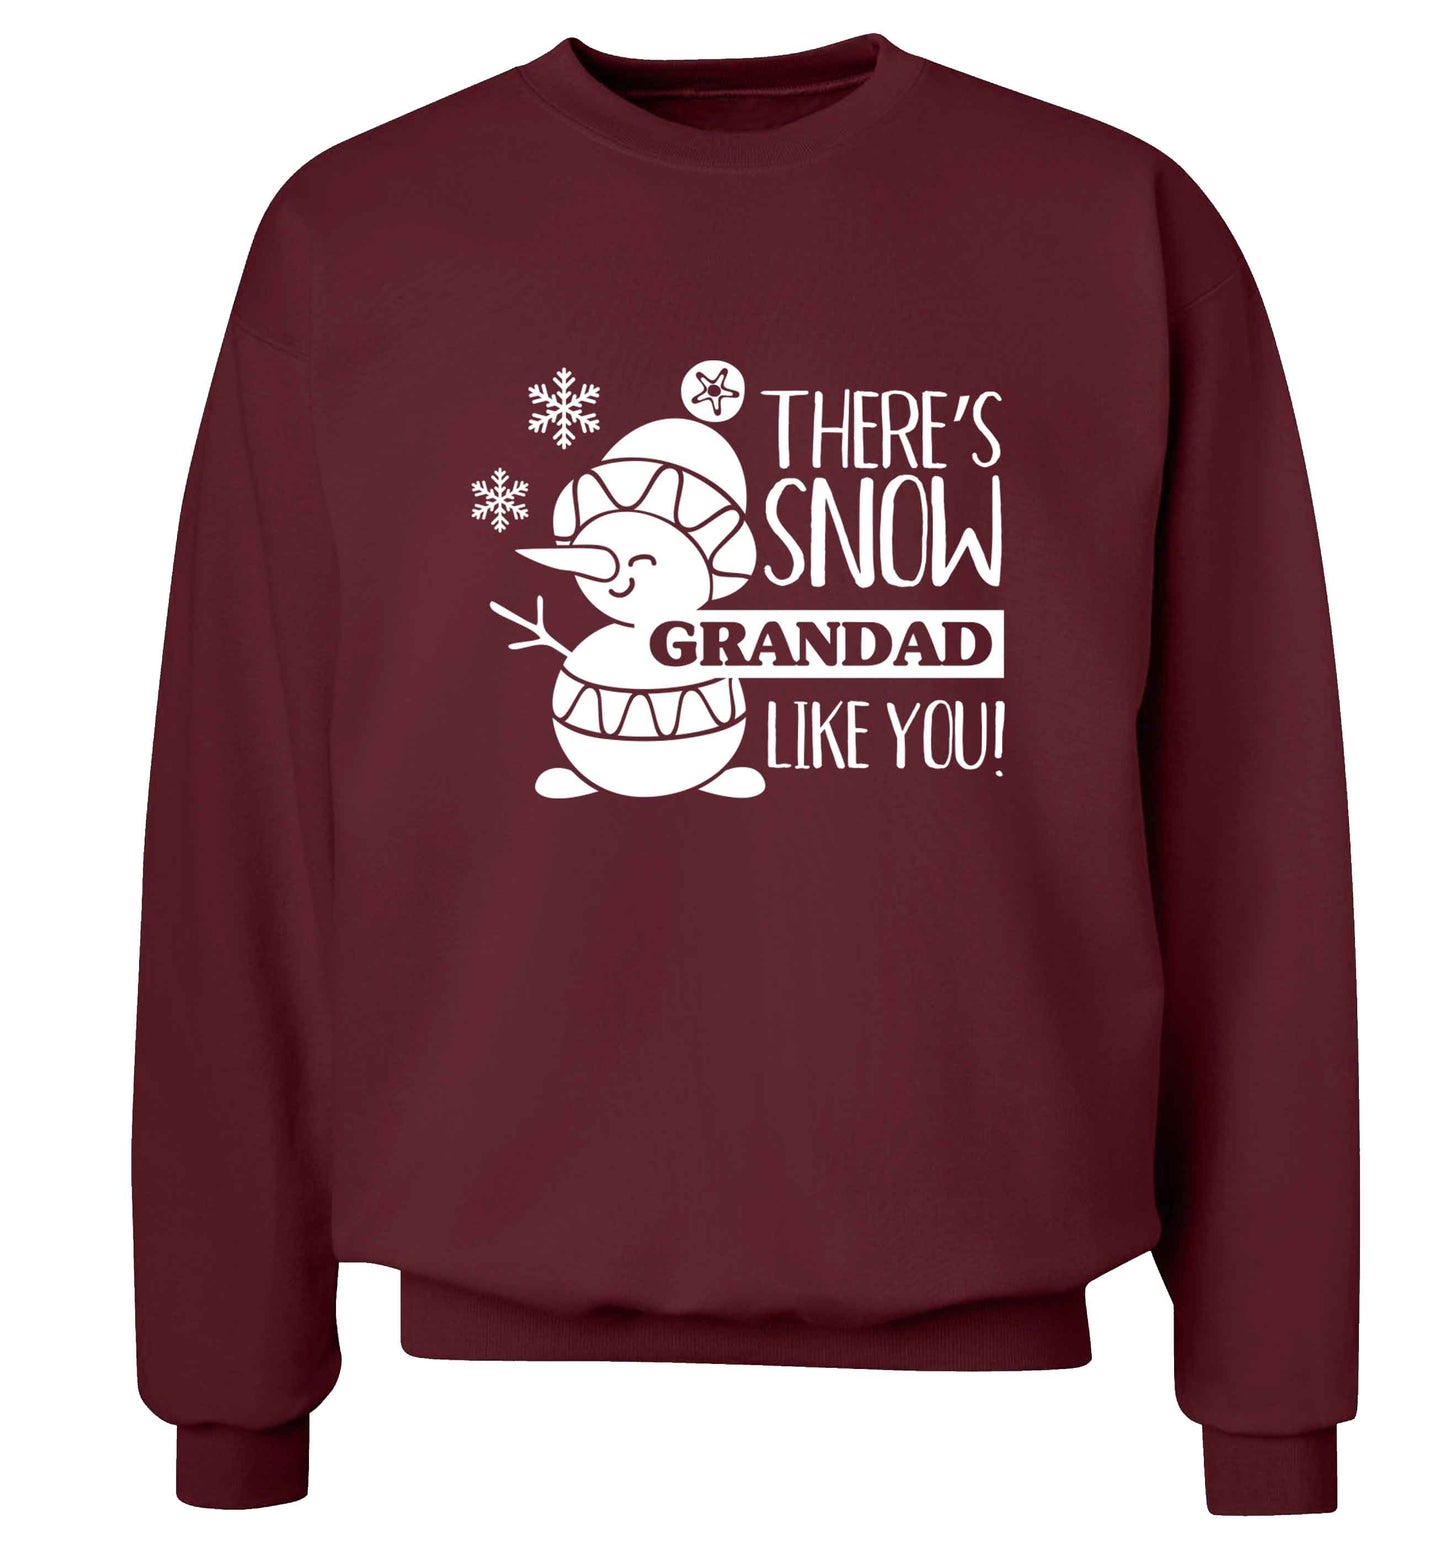 There's snow grandad like you adult's unisex maroon sweater 2XL